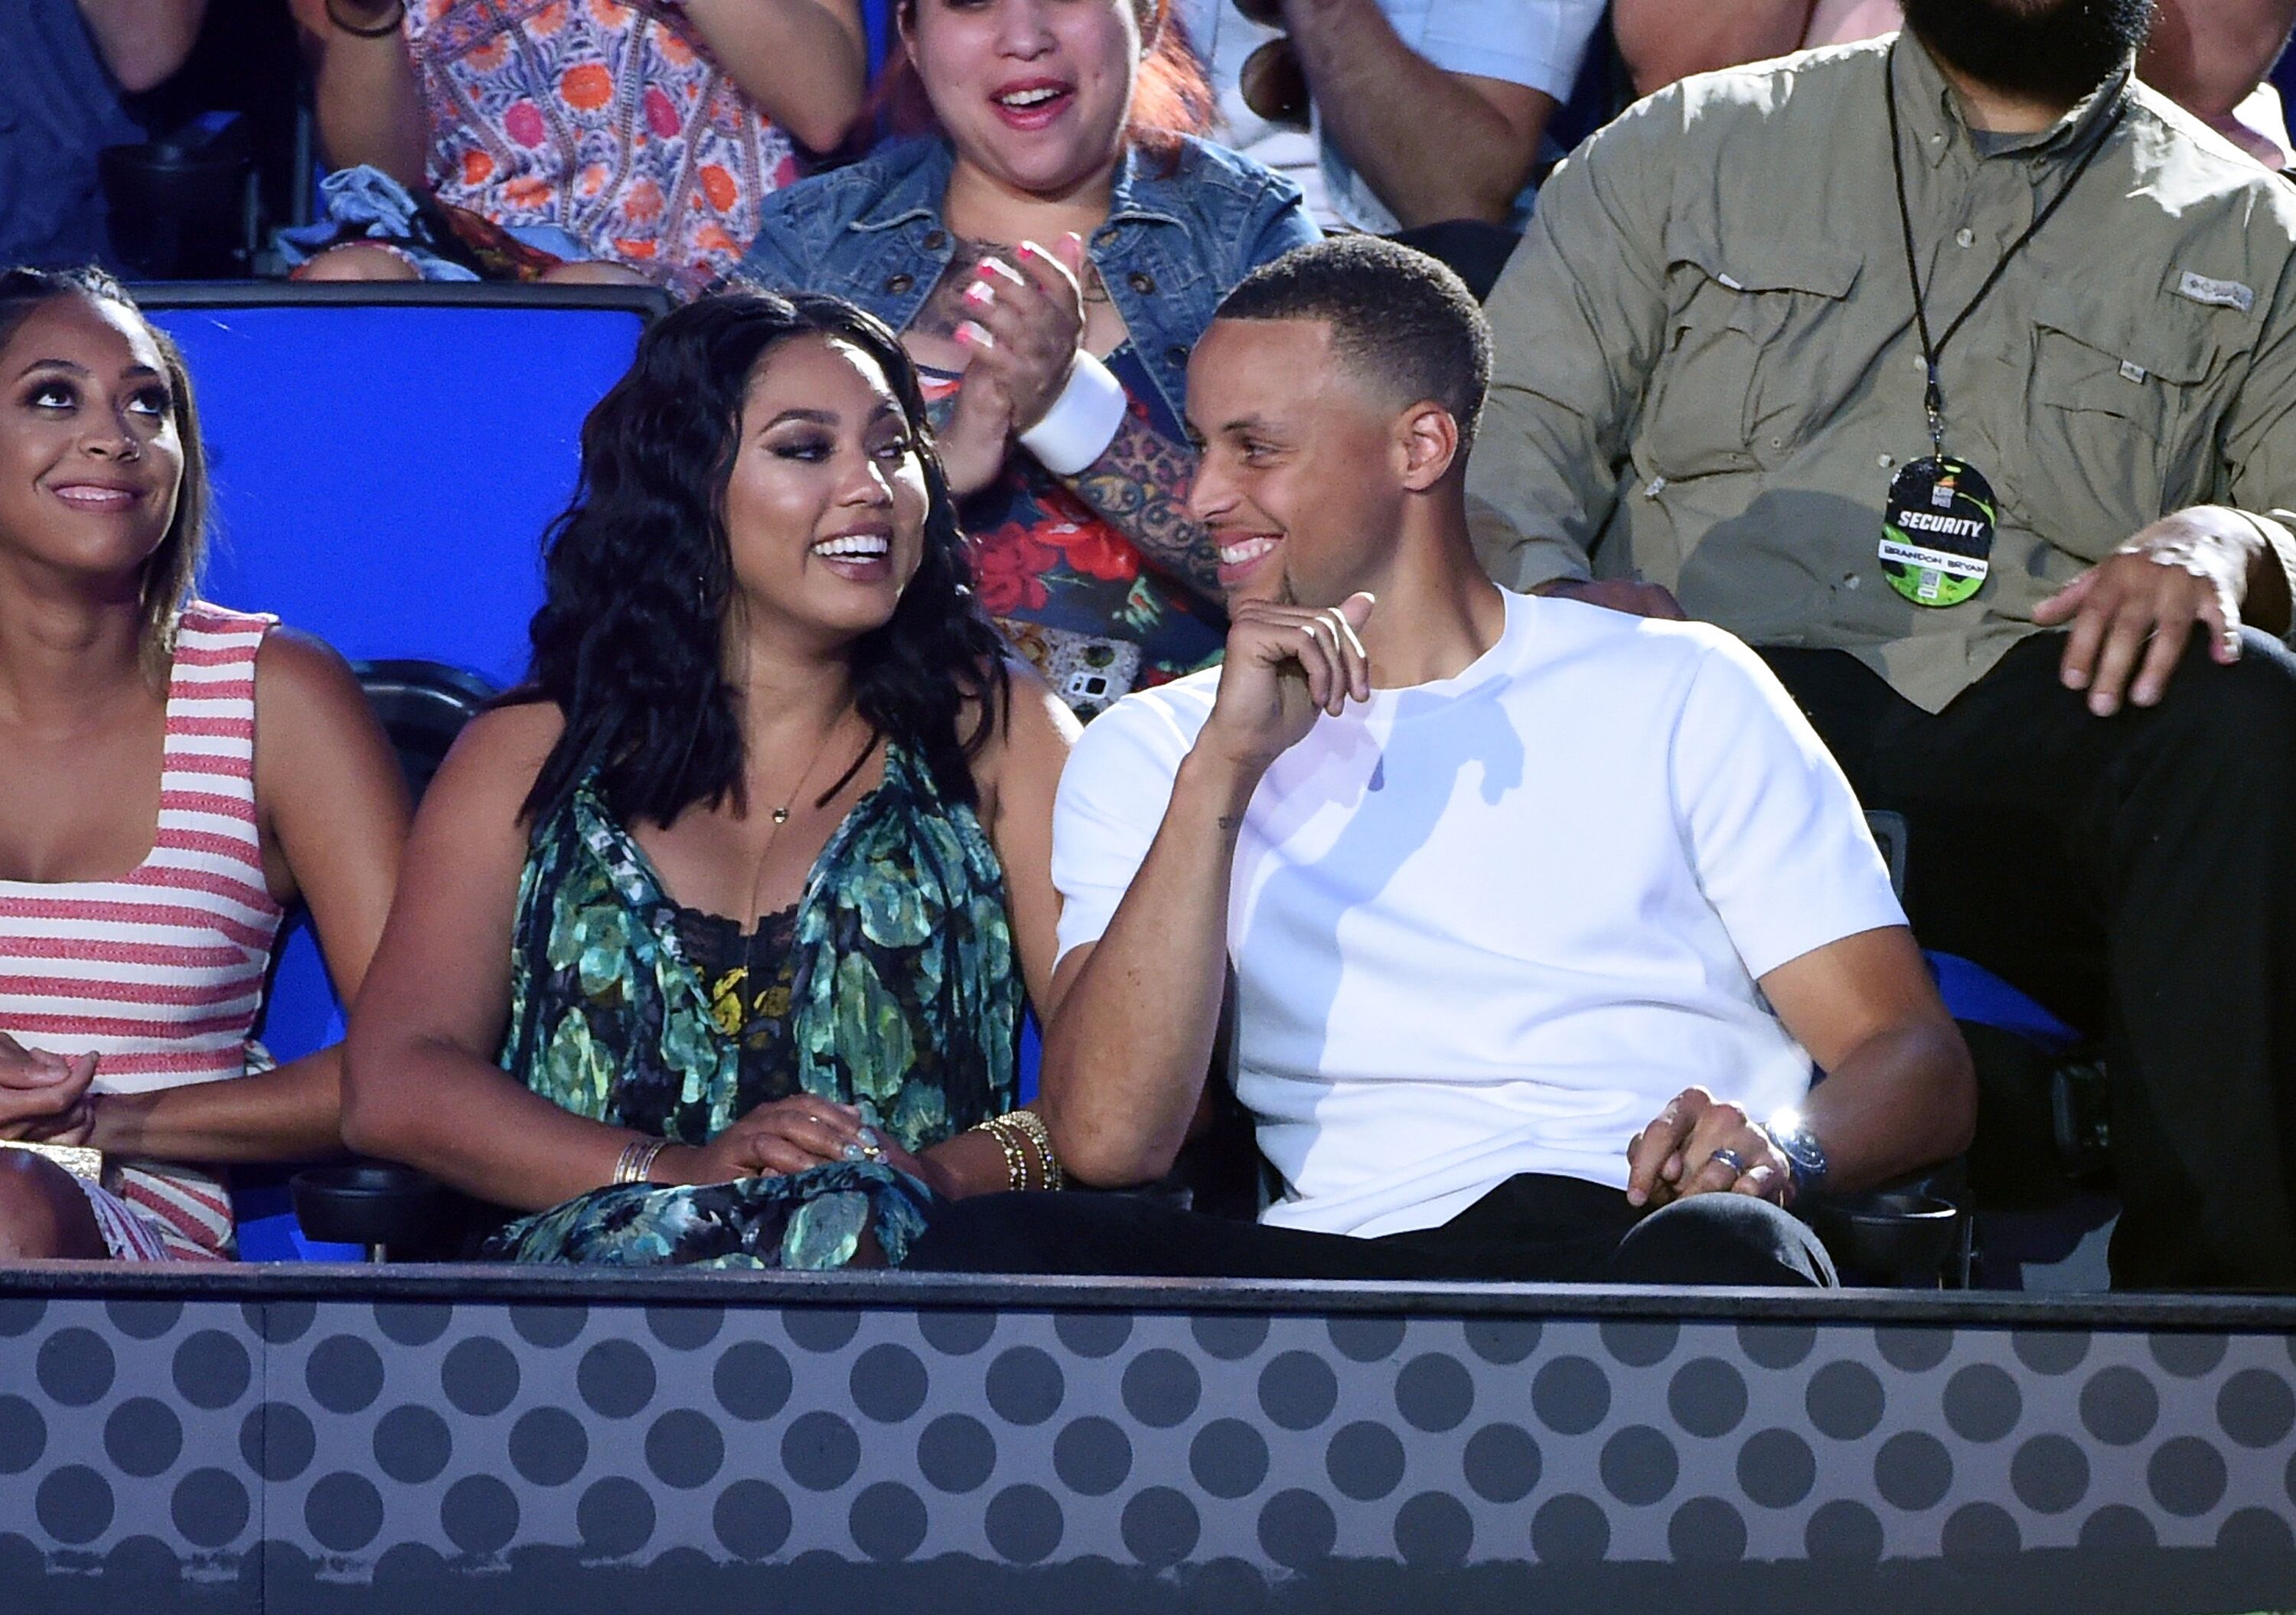  NBA player Stephen Curry and Ayesha Curry attend the Nickelodeon Kids' Choice Sports Awards 2016 at UCLA's Pauley Pavilion on July 14, 2016 | Photo: Getty Images